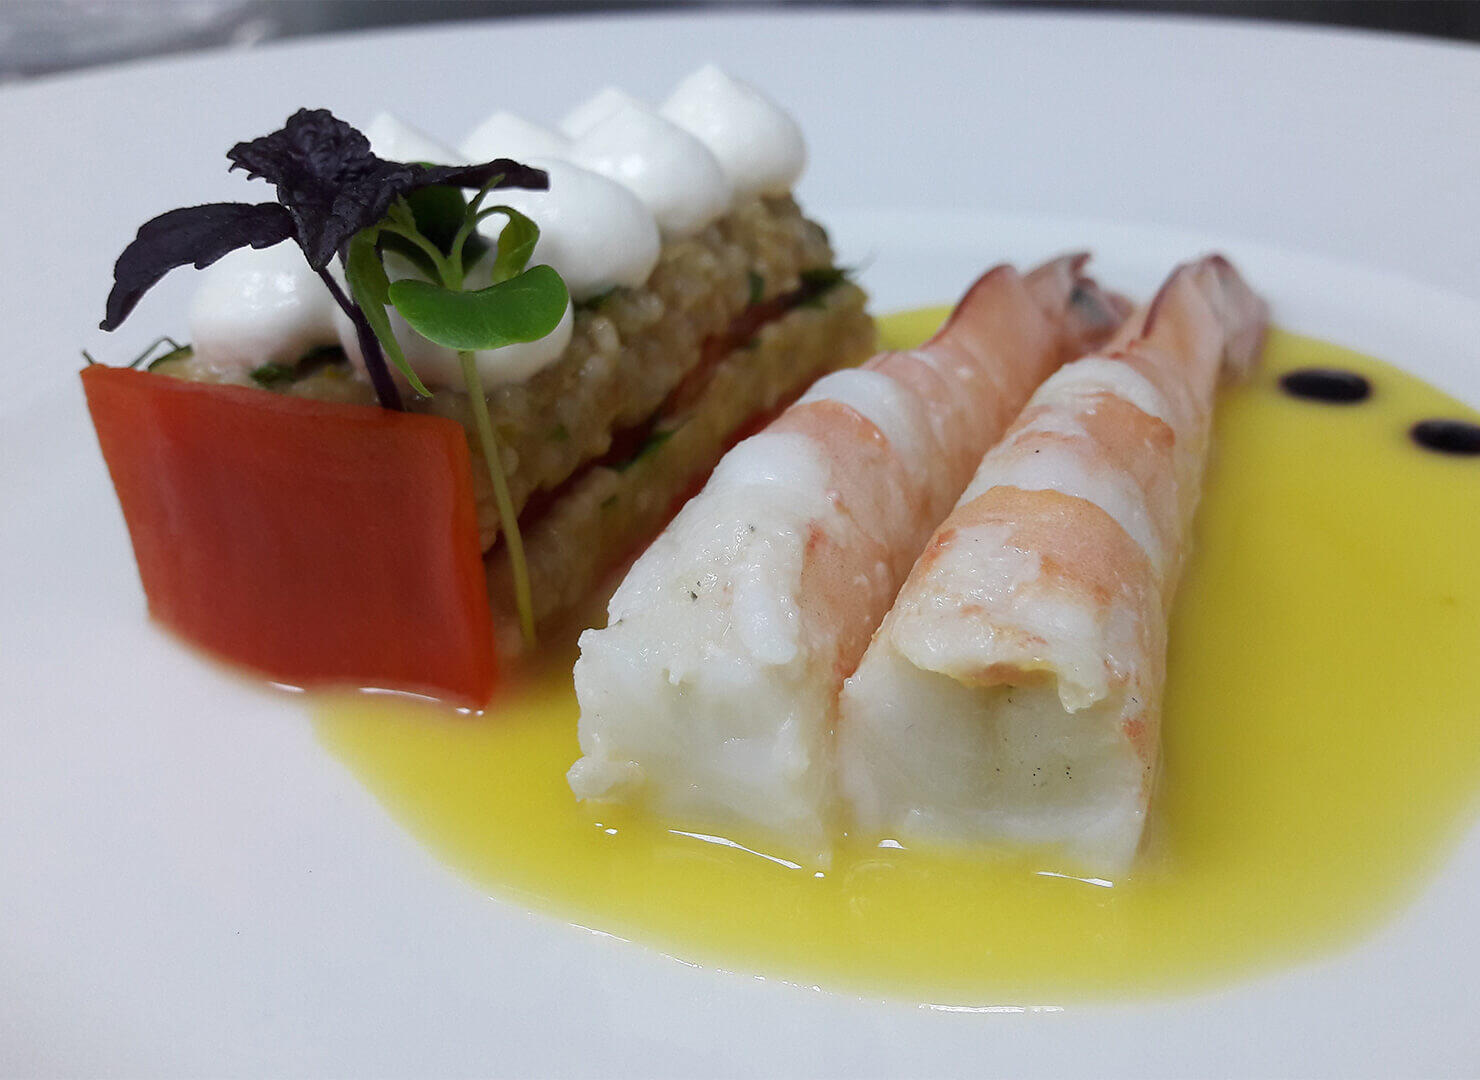 Trahanas (frumenty) with sweet red pepper confit, marinated shrimps and goat cheese mousse